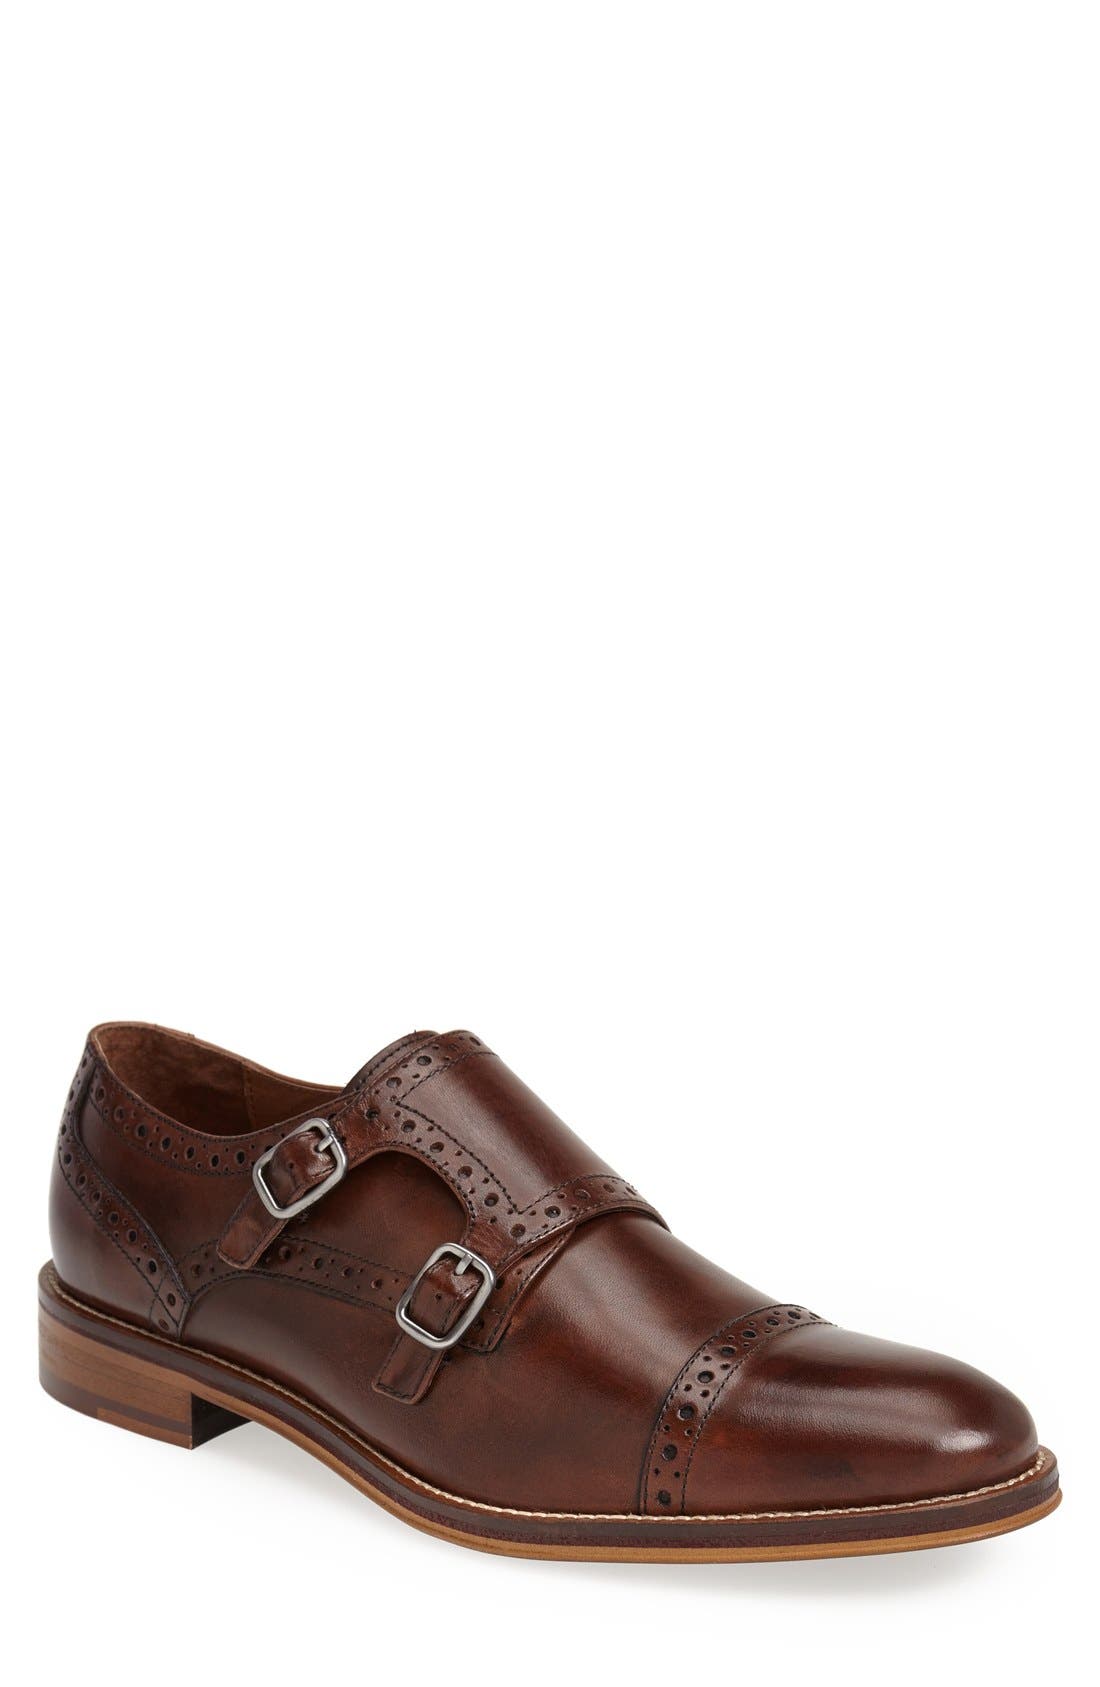 johnston and murphy double monk strap